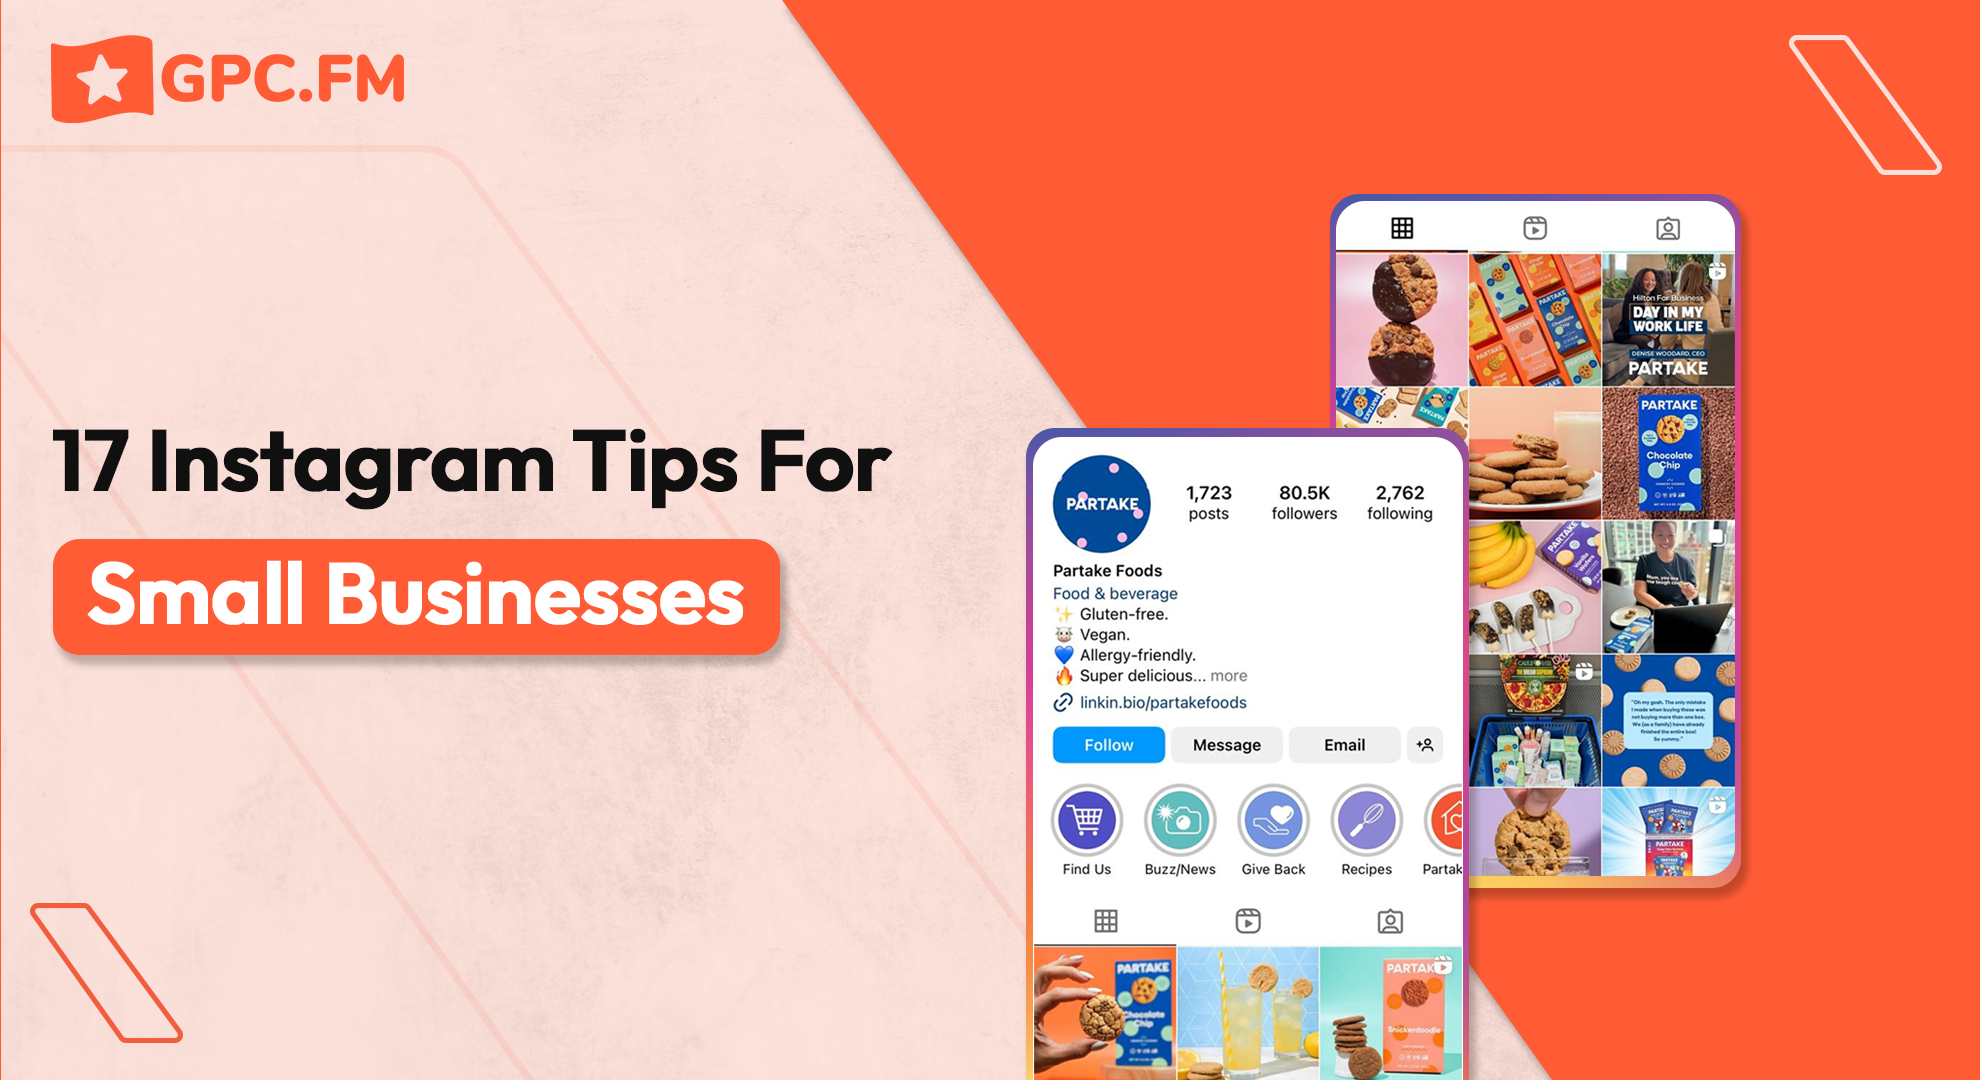 17 Instagram Tips For Small Businesses